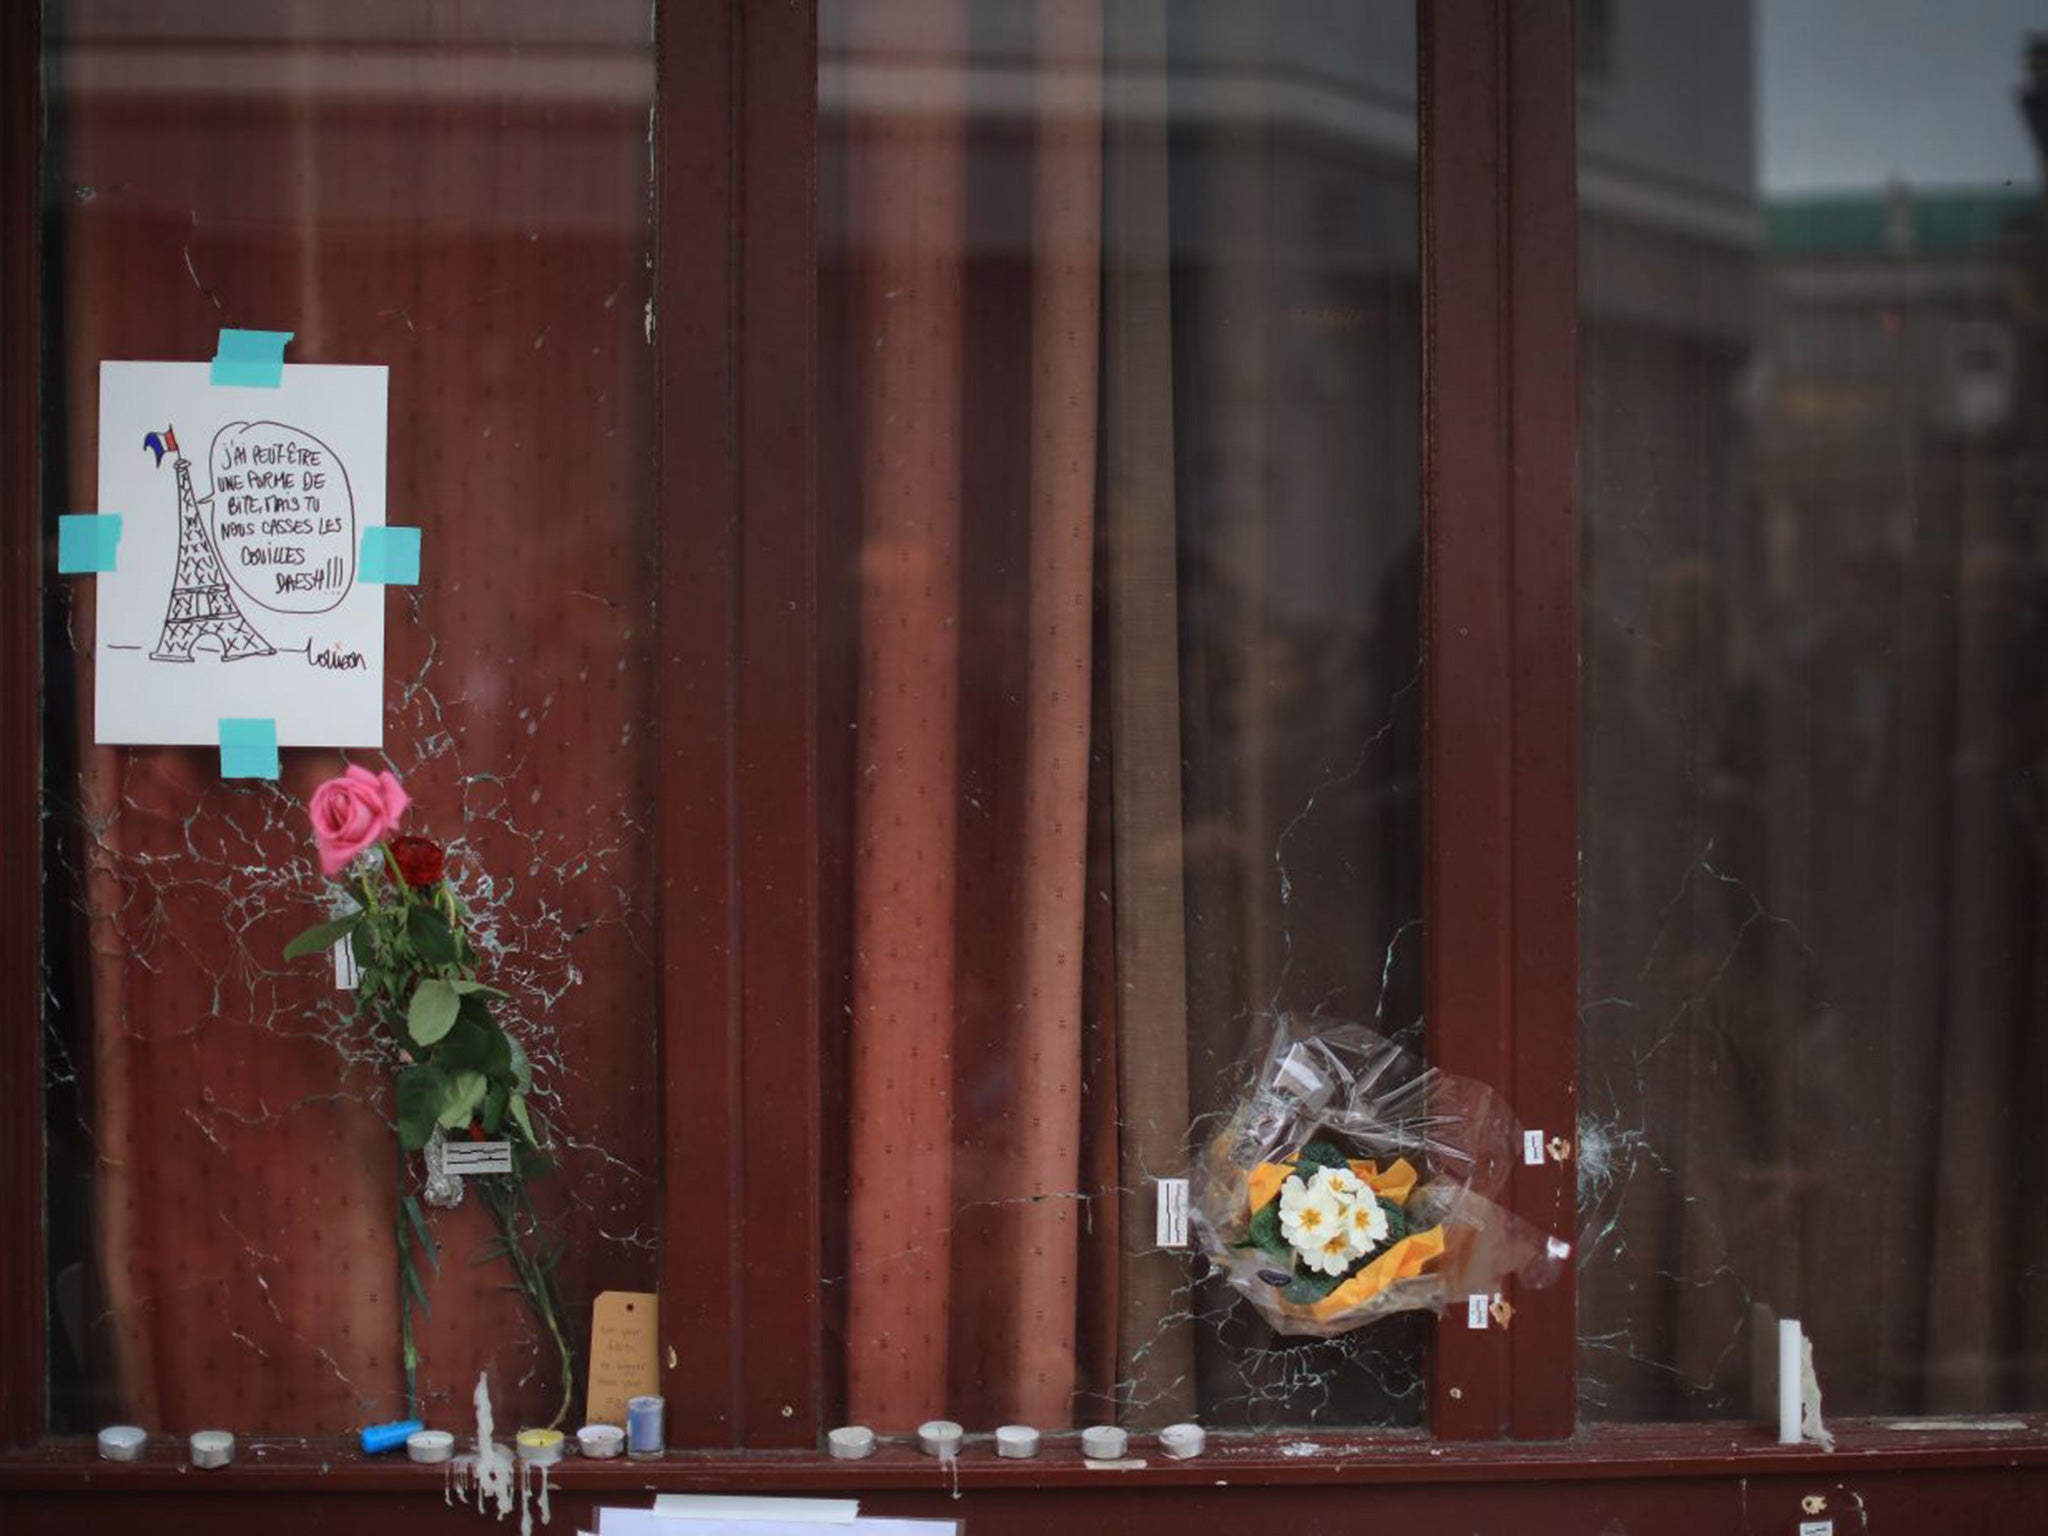 Flowers and tributes adorn the bullet damaged windows of the Le Carillon restaurant, one of the scenes of the November 16 attacks in Paris